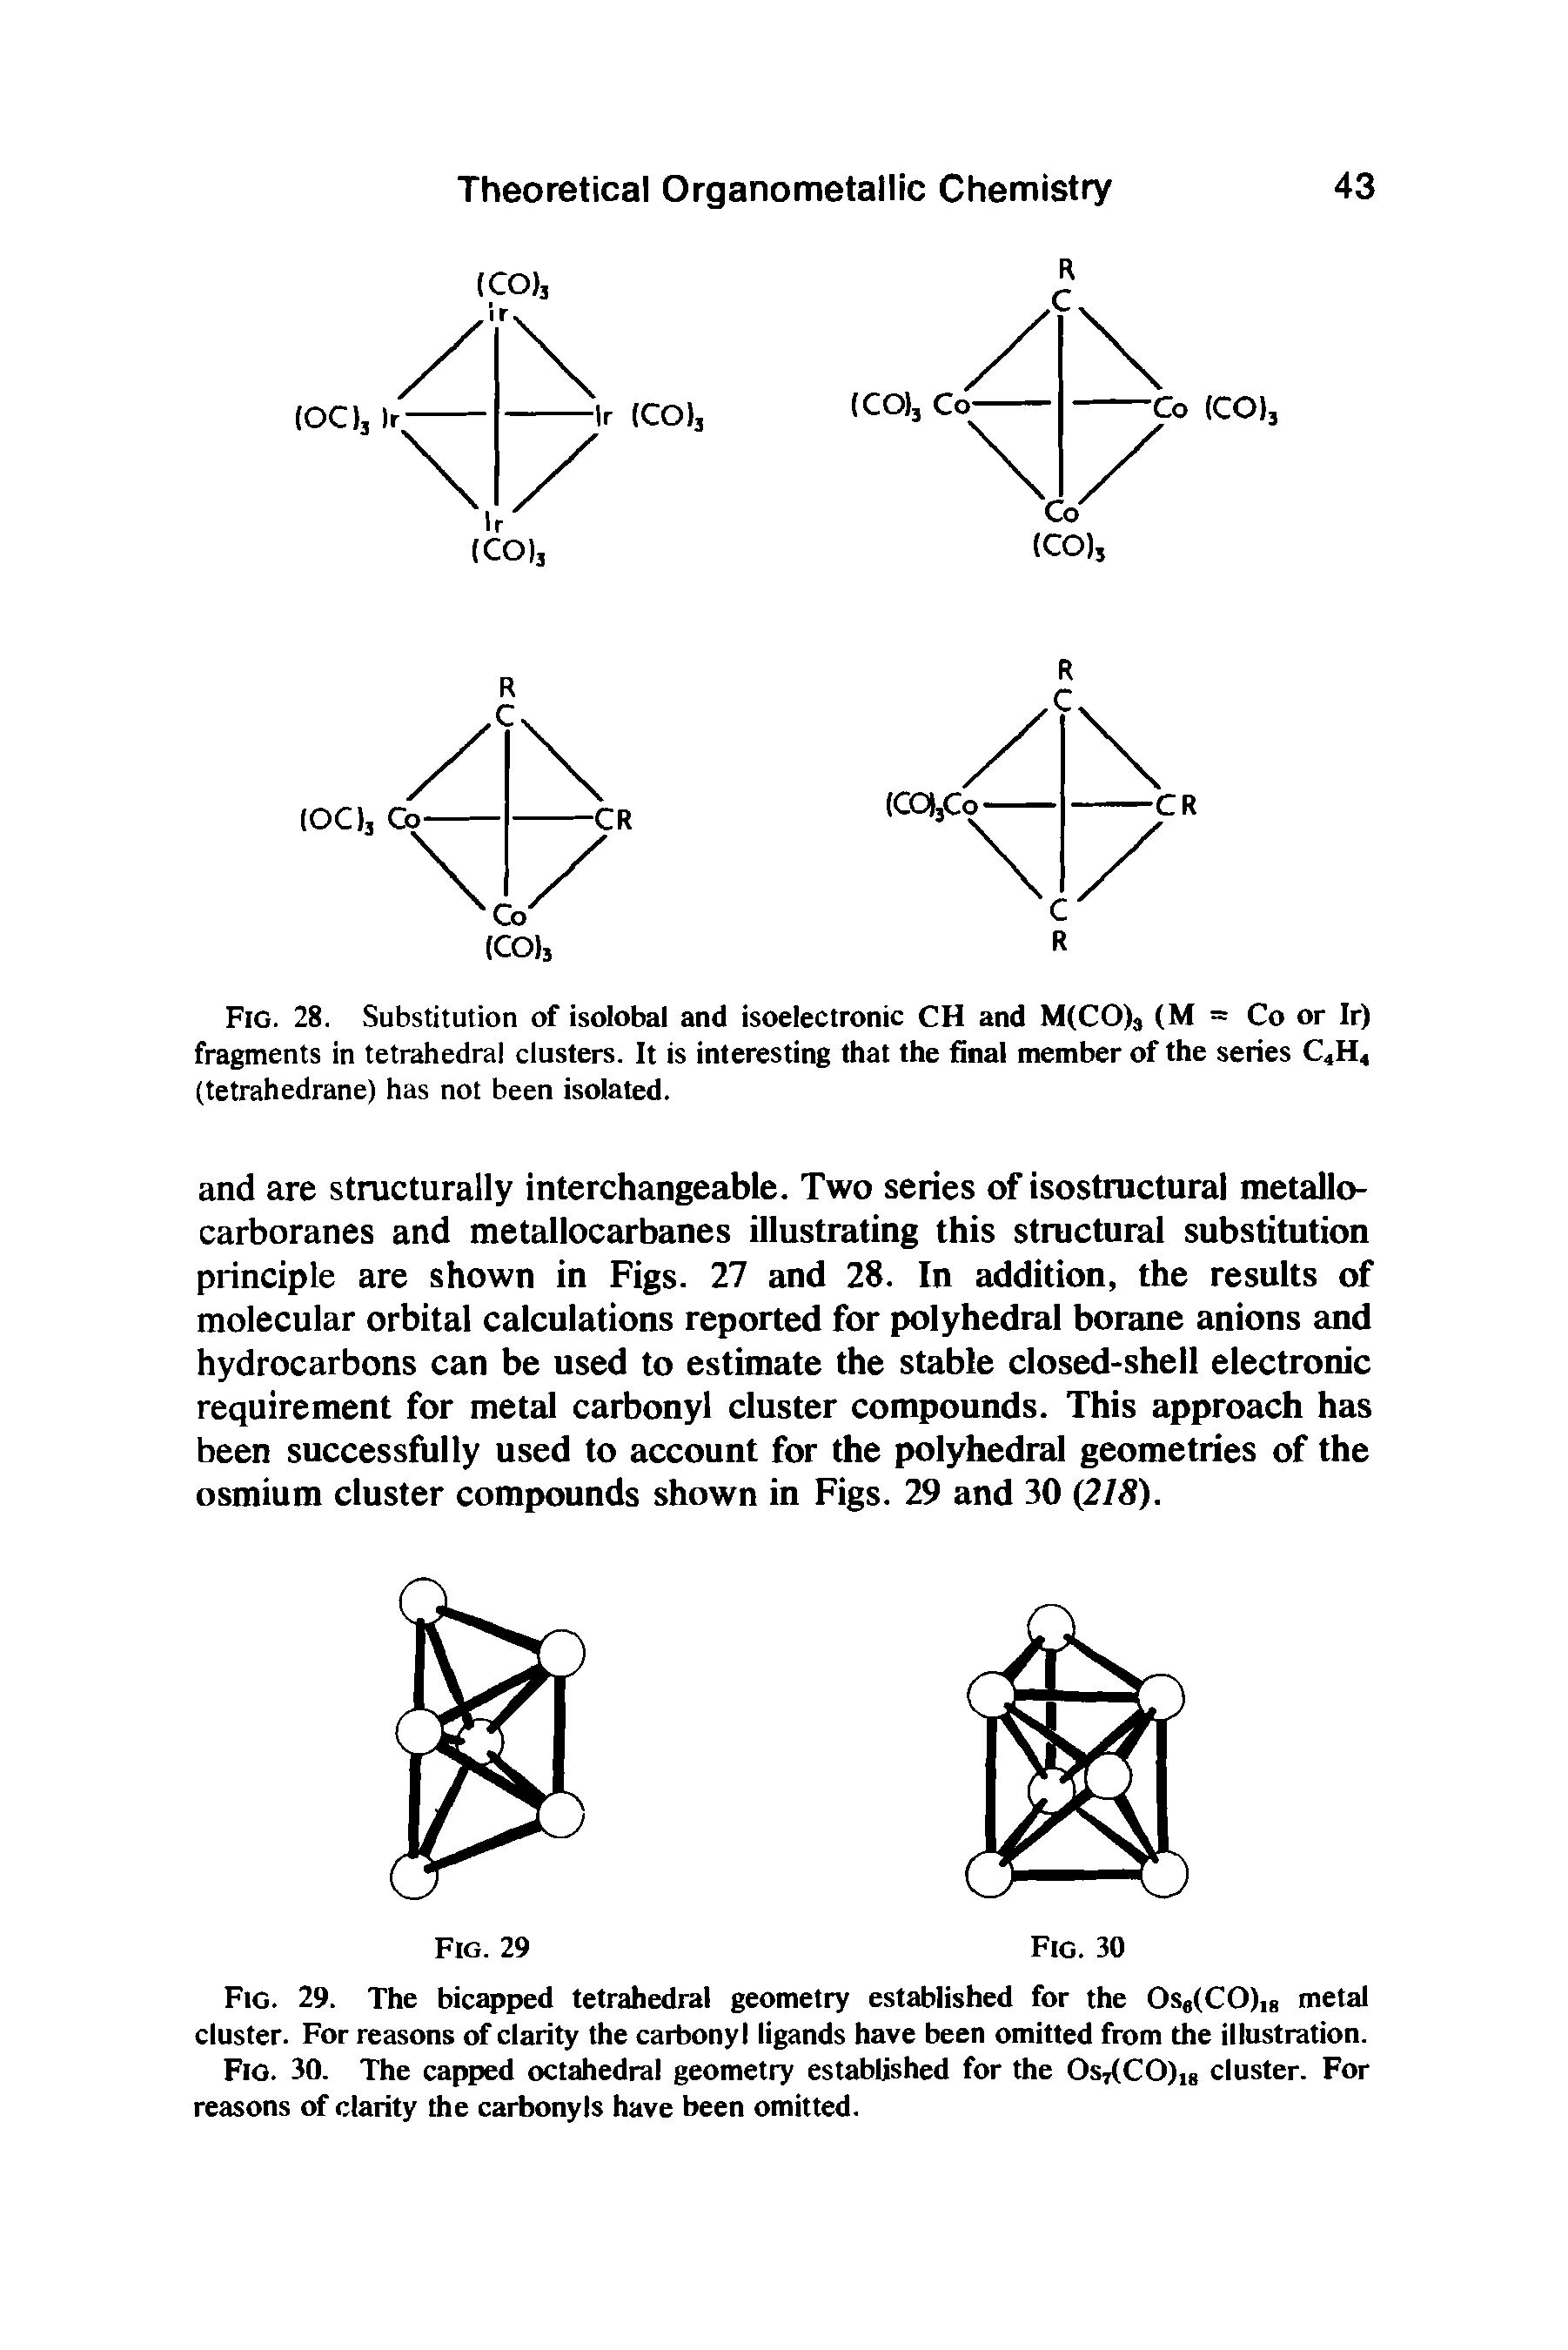 Fig. 30. The capped octahedral geometry established for the Ost(CO)18 cluster. For reasons of clarity the carbonyls have been omitted.